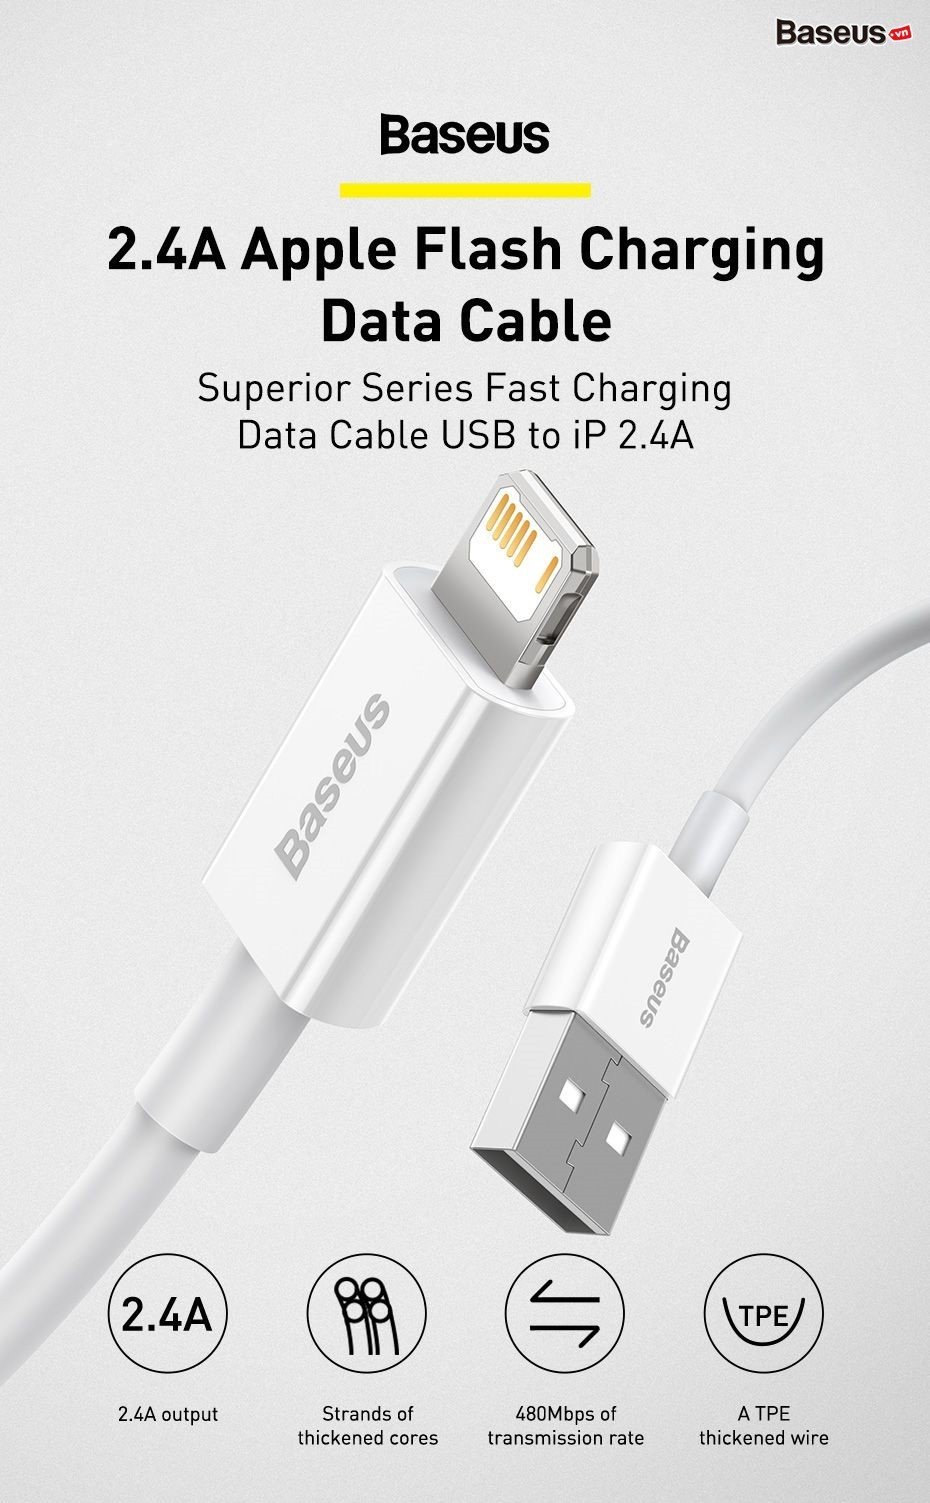 superior_series_fast_charging_data_cable_usb_to_ip_2.4a_images__01_69f902bb0688447ca651f1d83329f26f.jpg